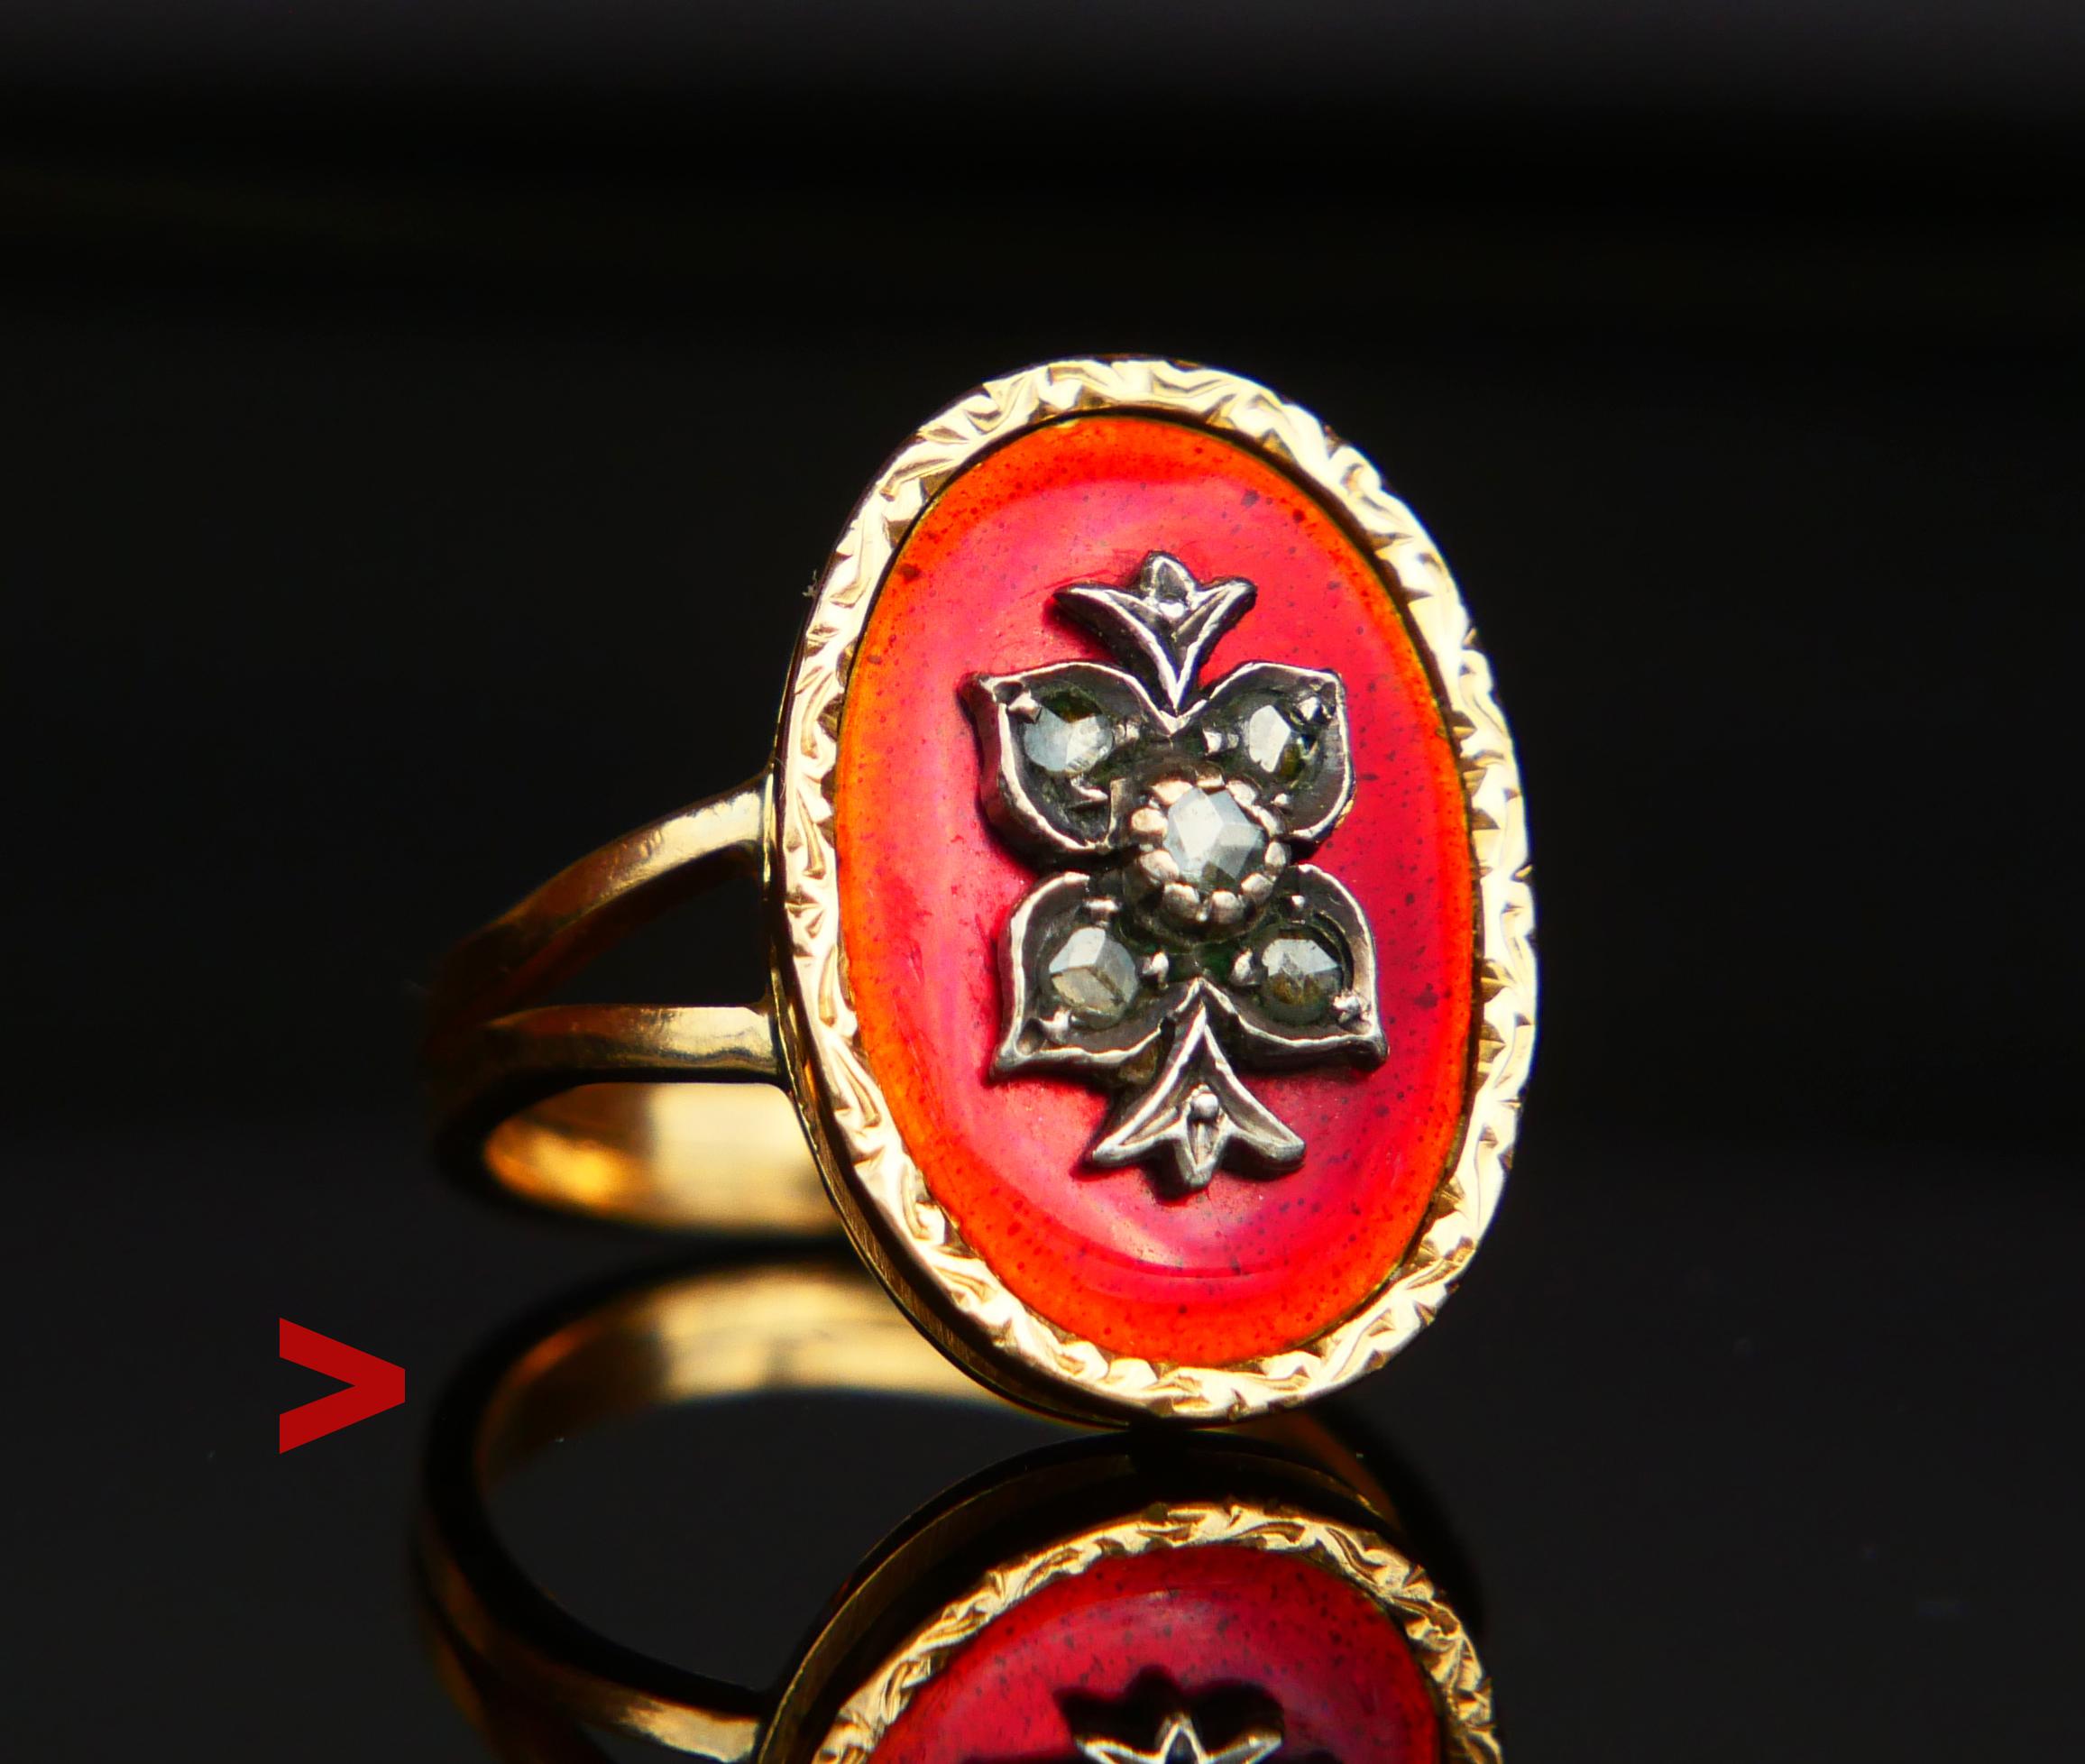 Old Russian or Finish Ring hand - made between late 19th - early 20 centuries. Floral ornament with rose cut Diamonds attached over translucent and speckled Red Enamel background. From 1775, Gold jewelry with Diamonds and Enamel became very popular